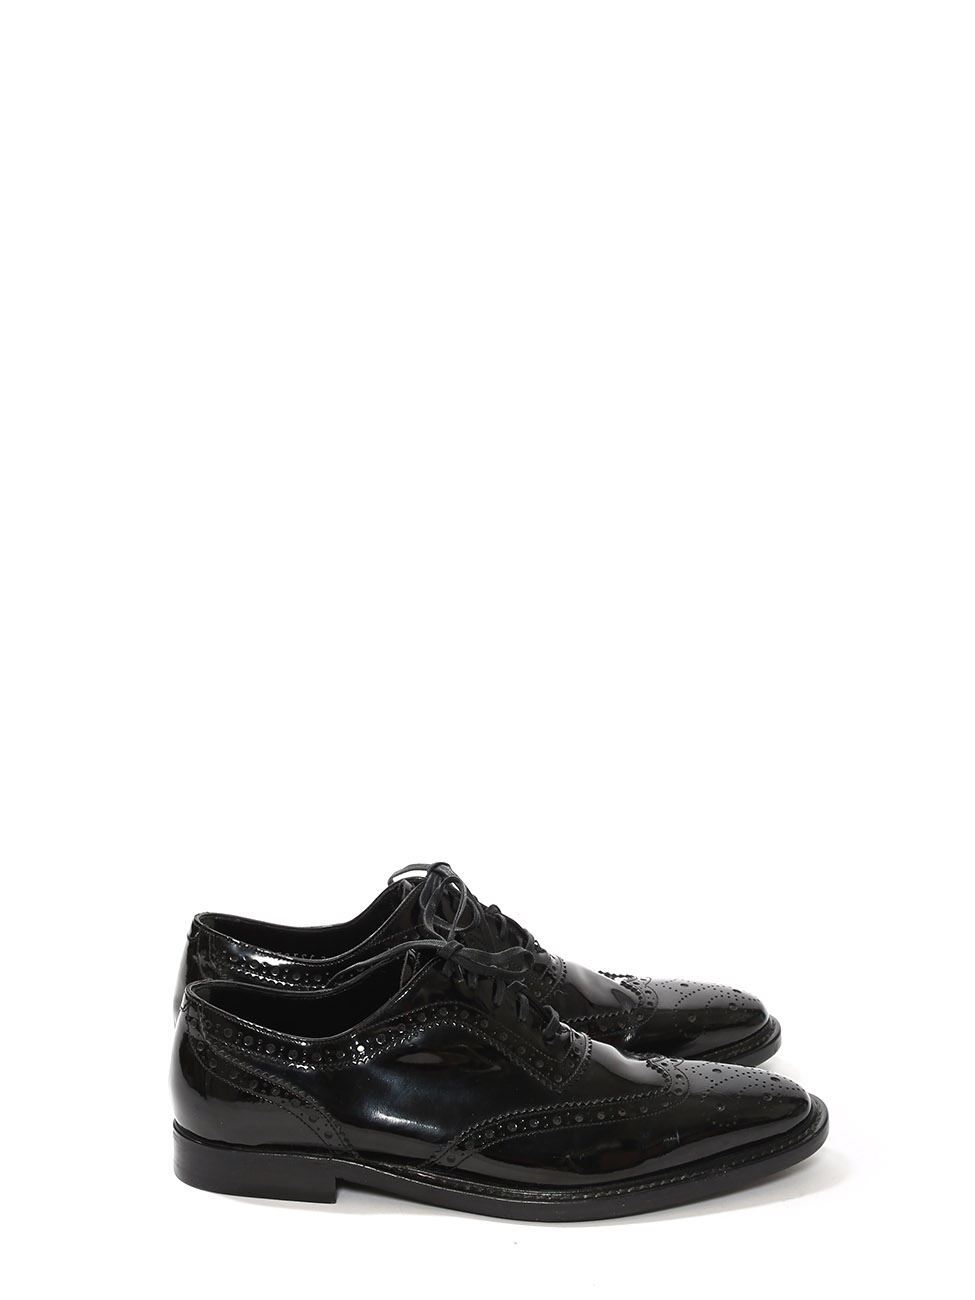 Boutique DOLCE & GABBANA Black patent leather perforated leather brogue  shoes Retail price €475 Size 38.5